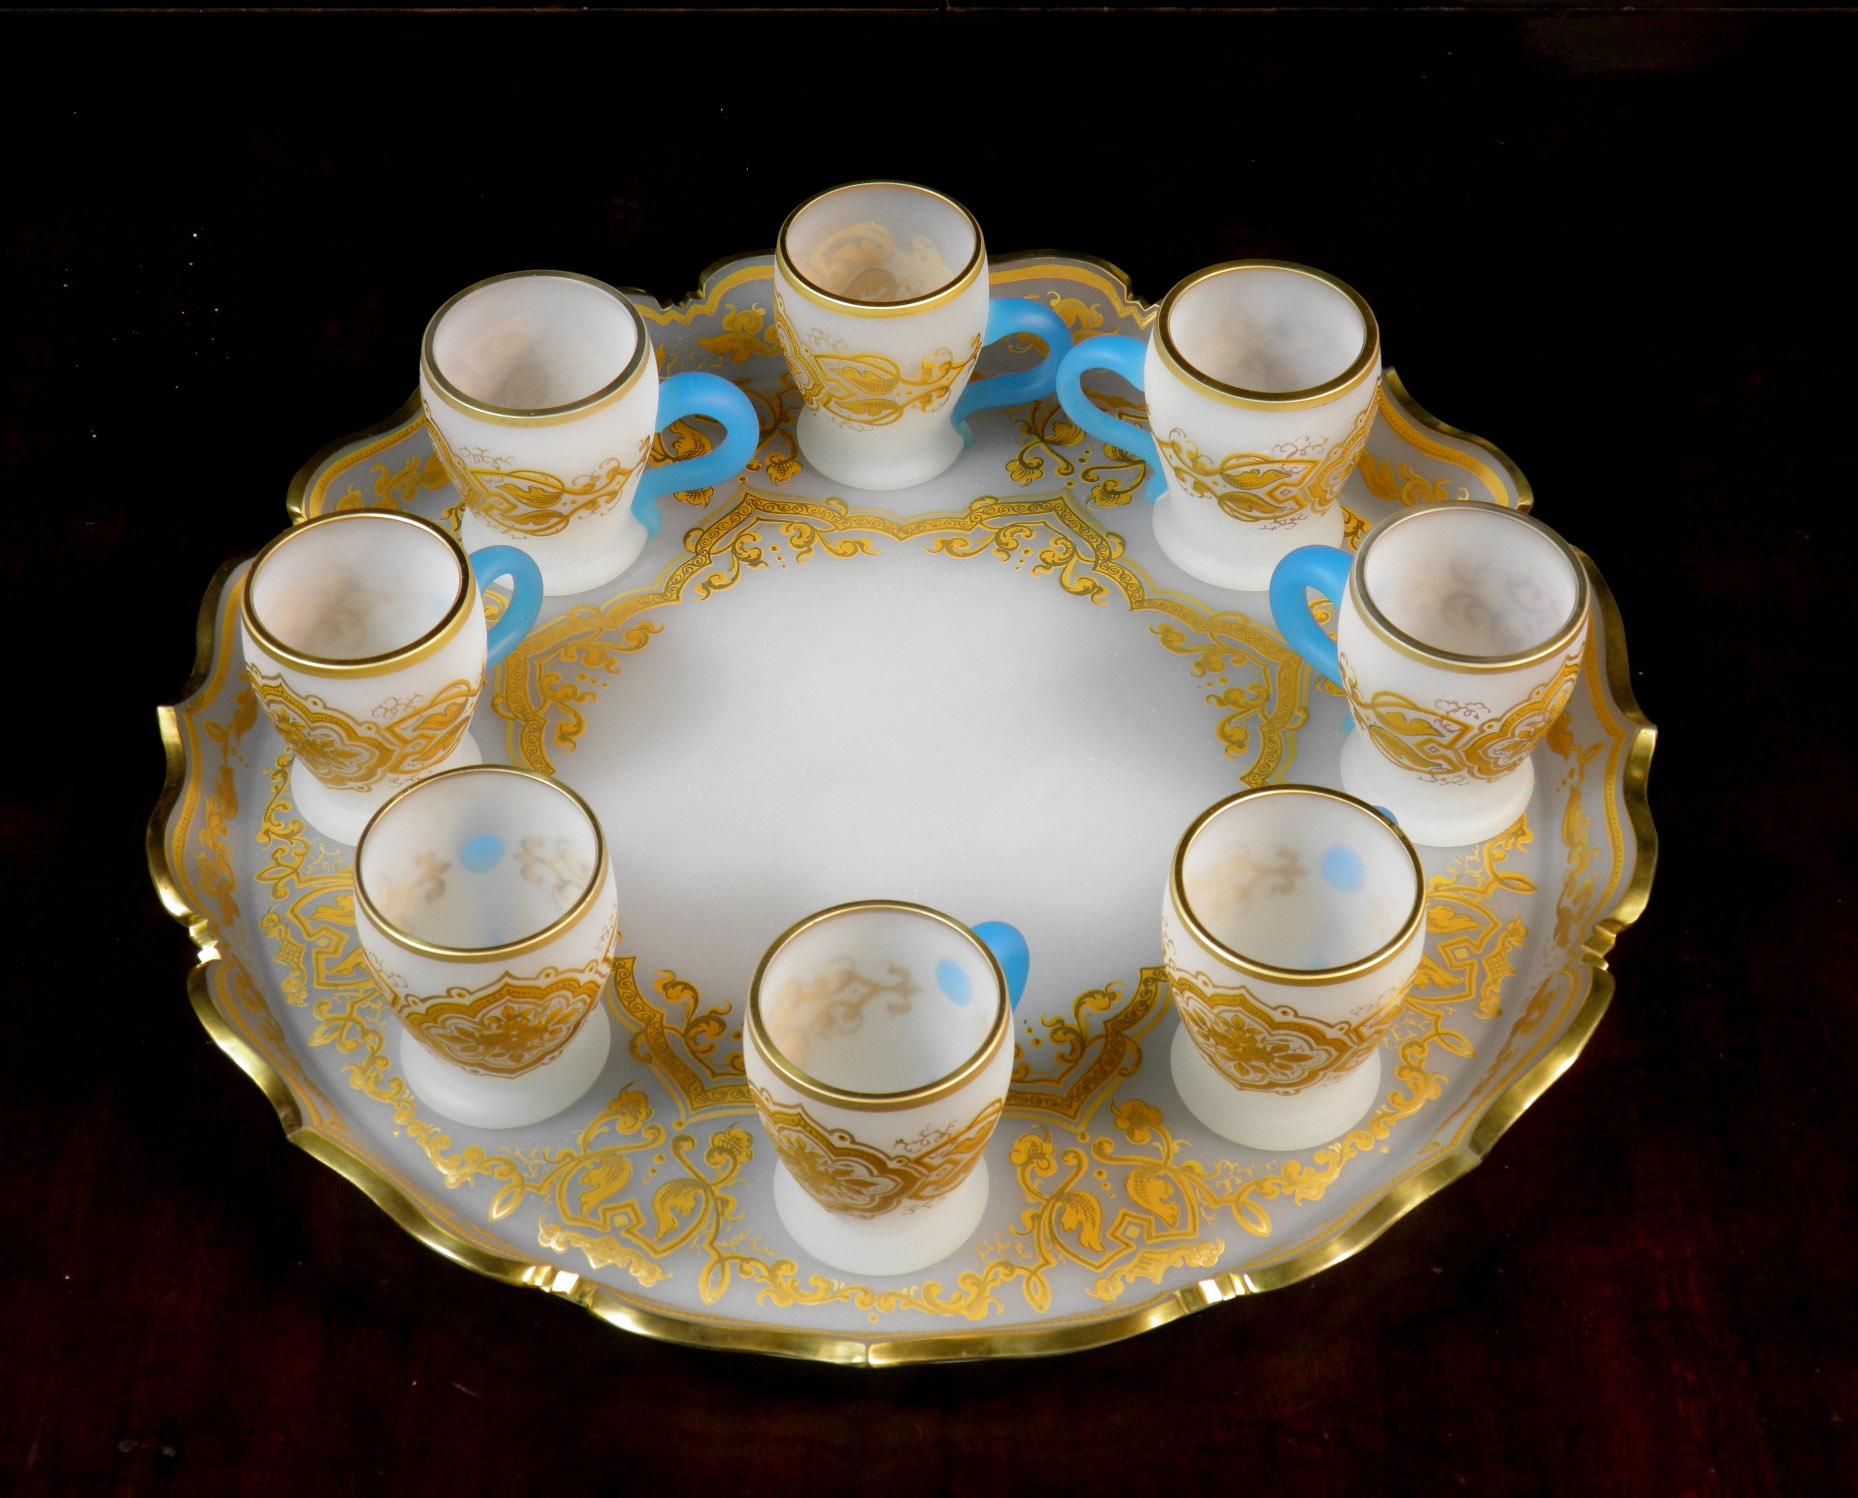 Antique punch bowl opal glass hand cut and gilded 
Made of opal glass, white and blue. Hand cut and beautifully painted with ocher colors, subsequently gilded. A beautiful thing from the end of the 19th century. Made in Europe. Bohemian  or France